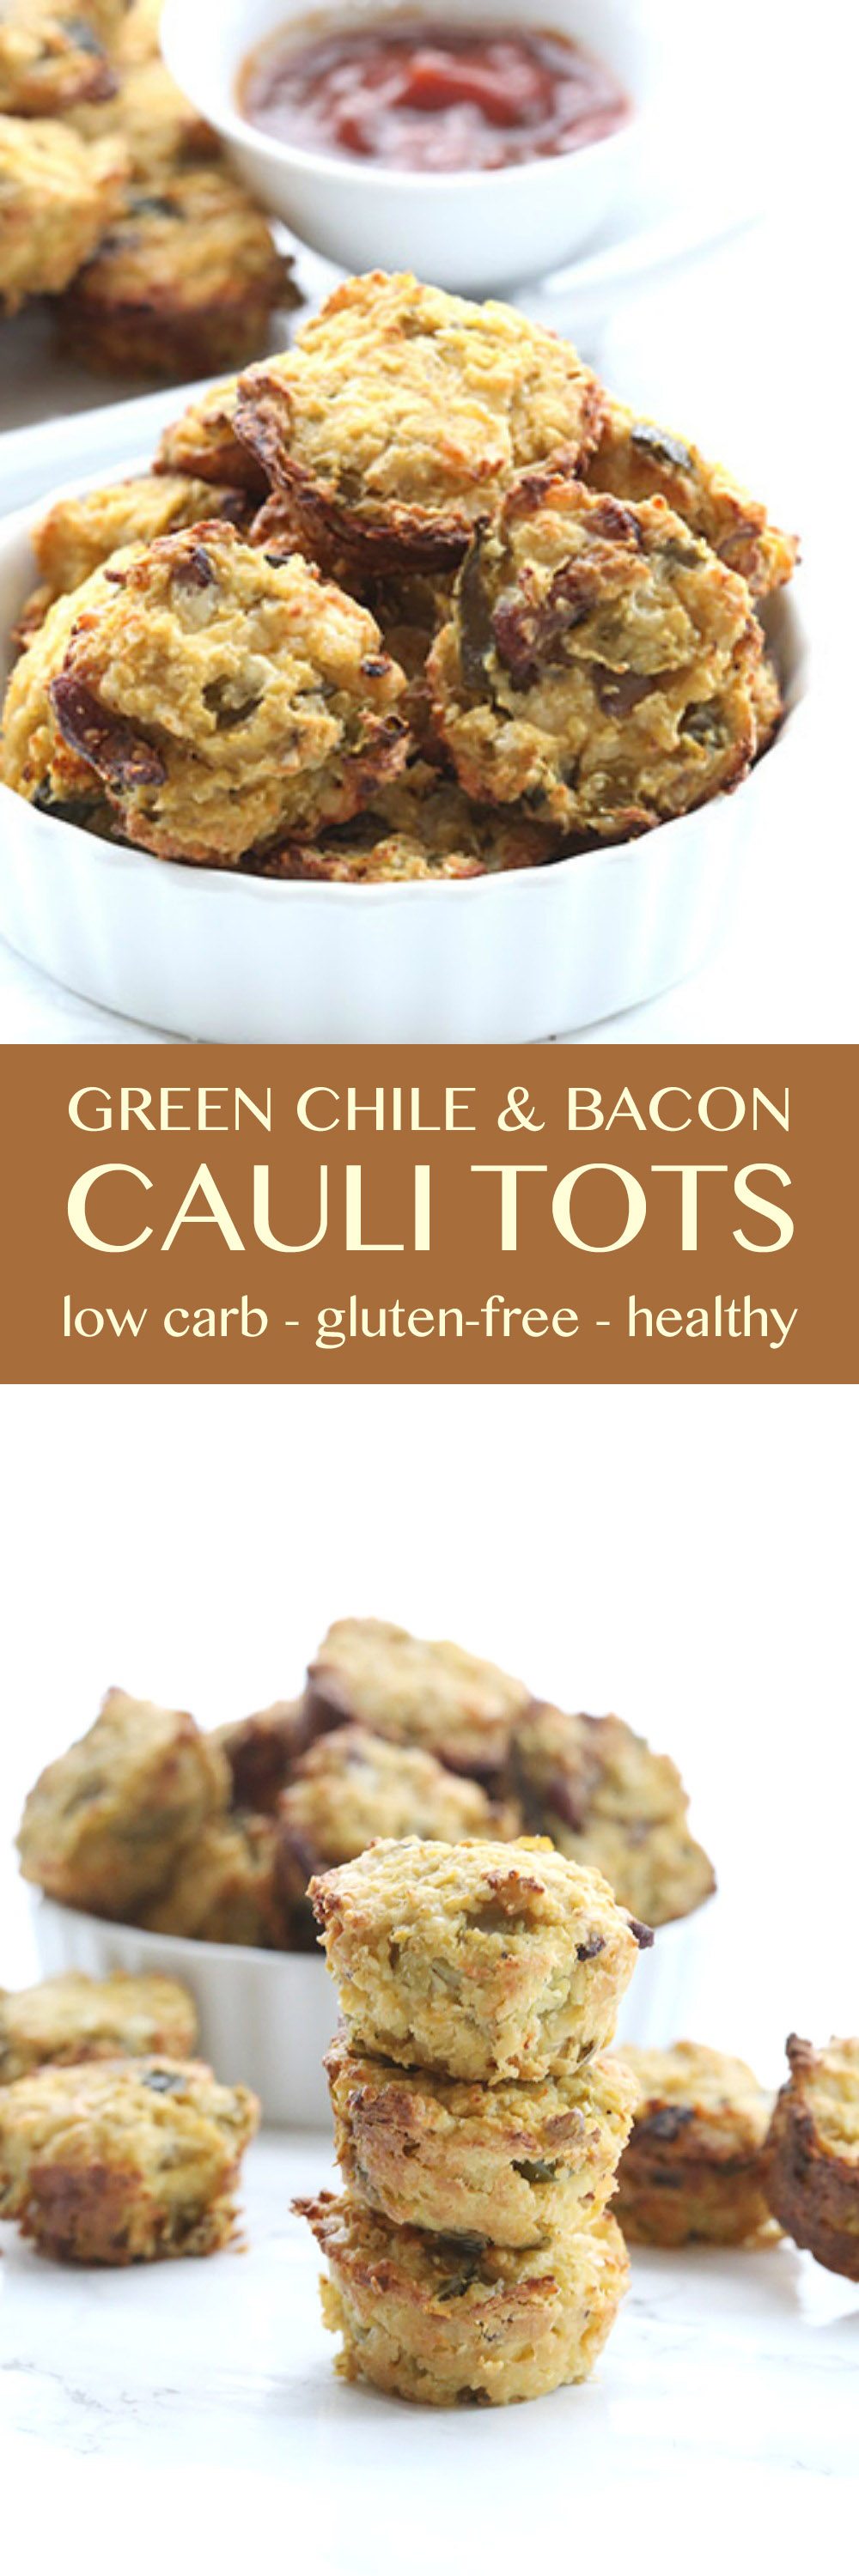 These low carb cauliflower tots with green chilies and bacon make a great healthy Game Day appetizer!